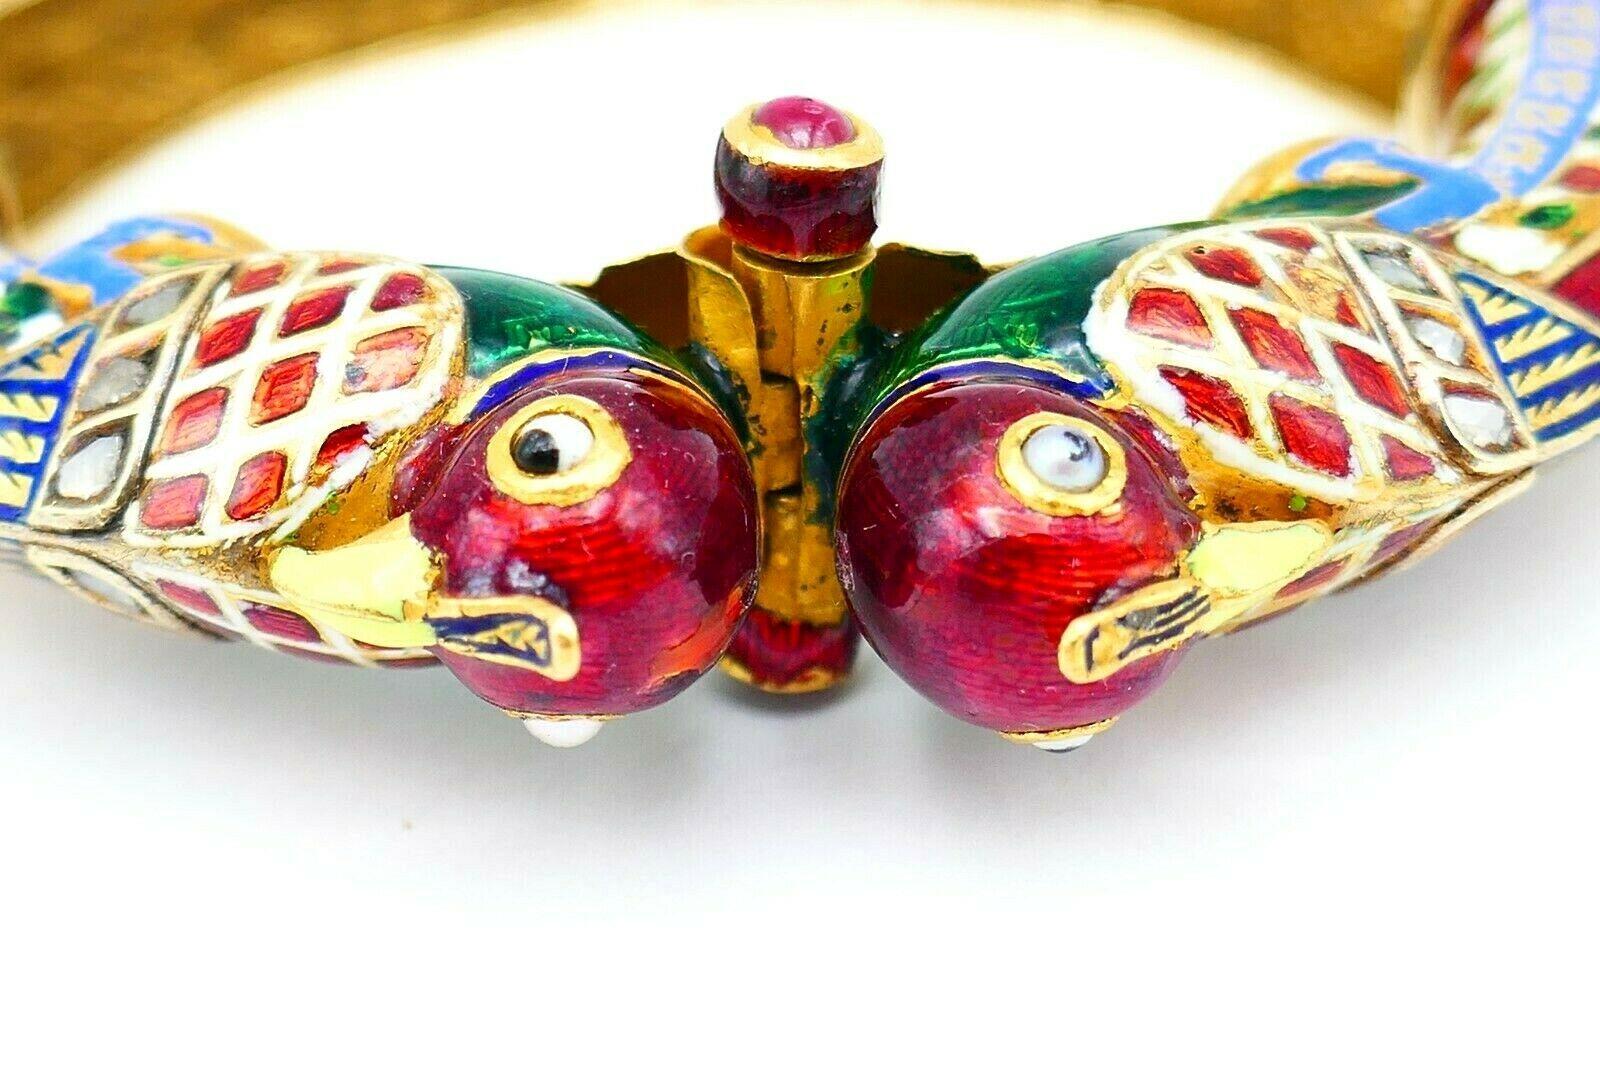 A colorful Indian bangle bracelet made of 22k yellow gold (tested), features hand painted enamel, rose cut diamond and cabochon ruby. Has a screw-in closure. 
Measurements: the inner circumference is 6.25